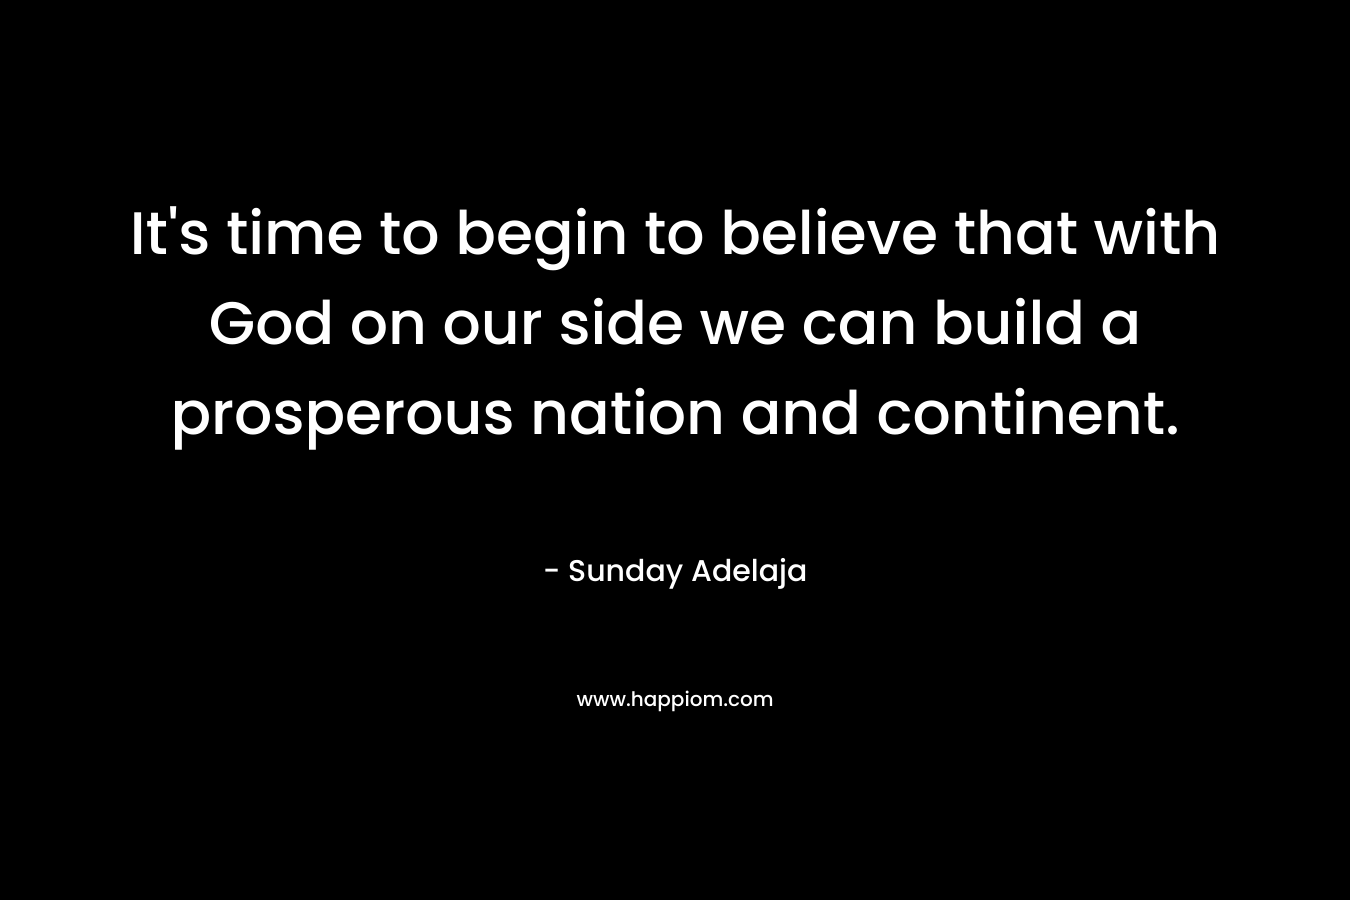 It’s time to begin to believe that with God on our side we can build a prosperous nation and continent. – Sunday Adelaja